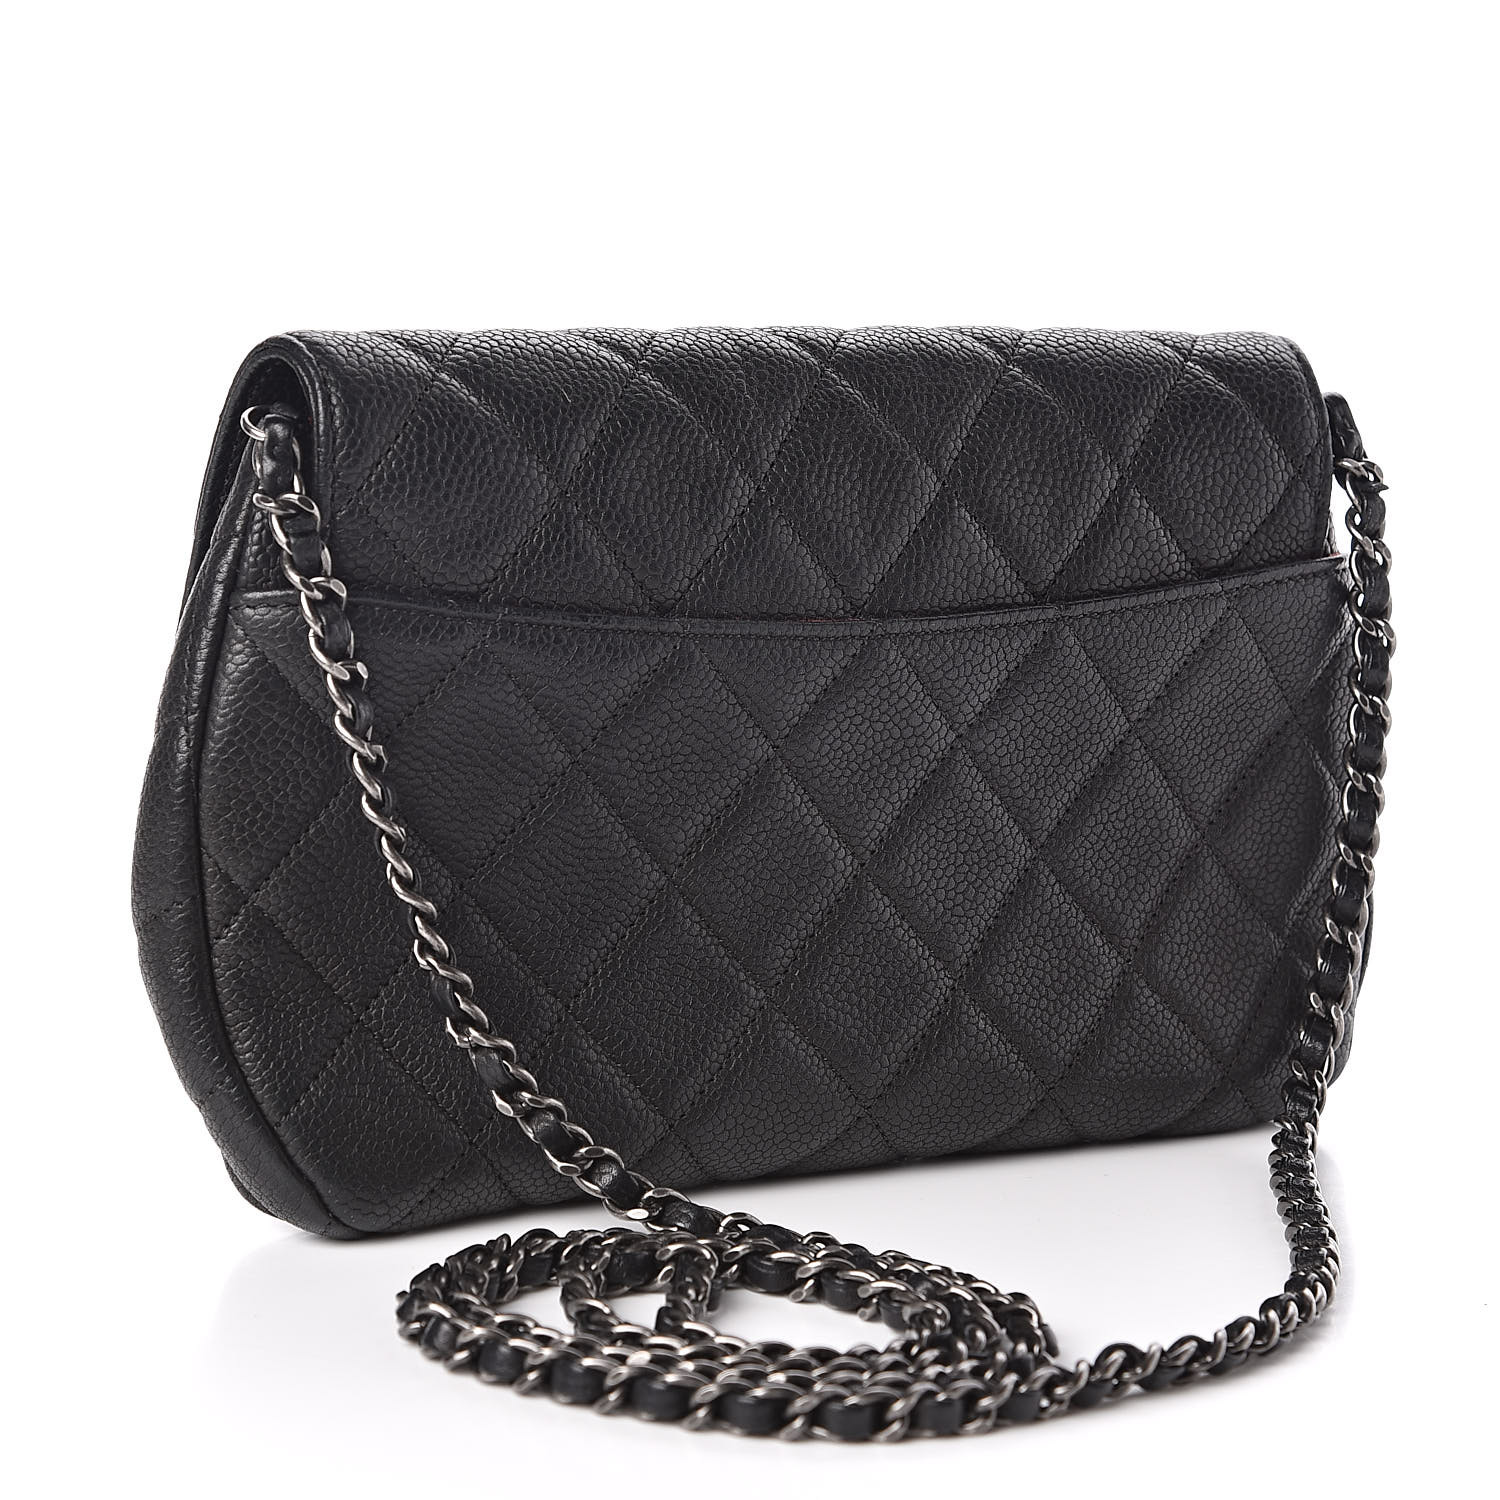 CHANEL Caviar Quilted Crossbody Bag Black 510425